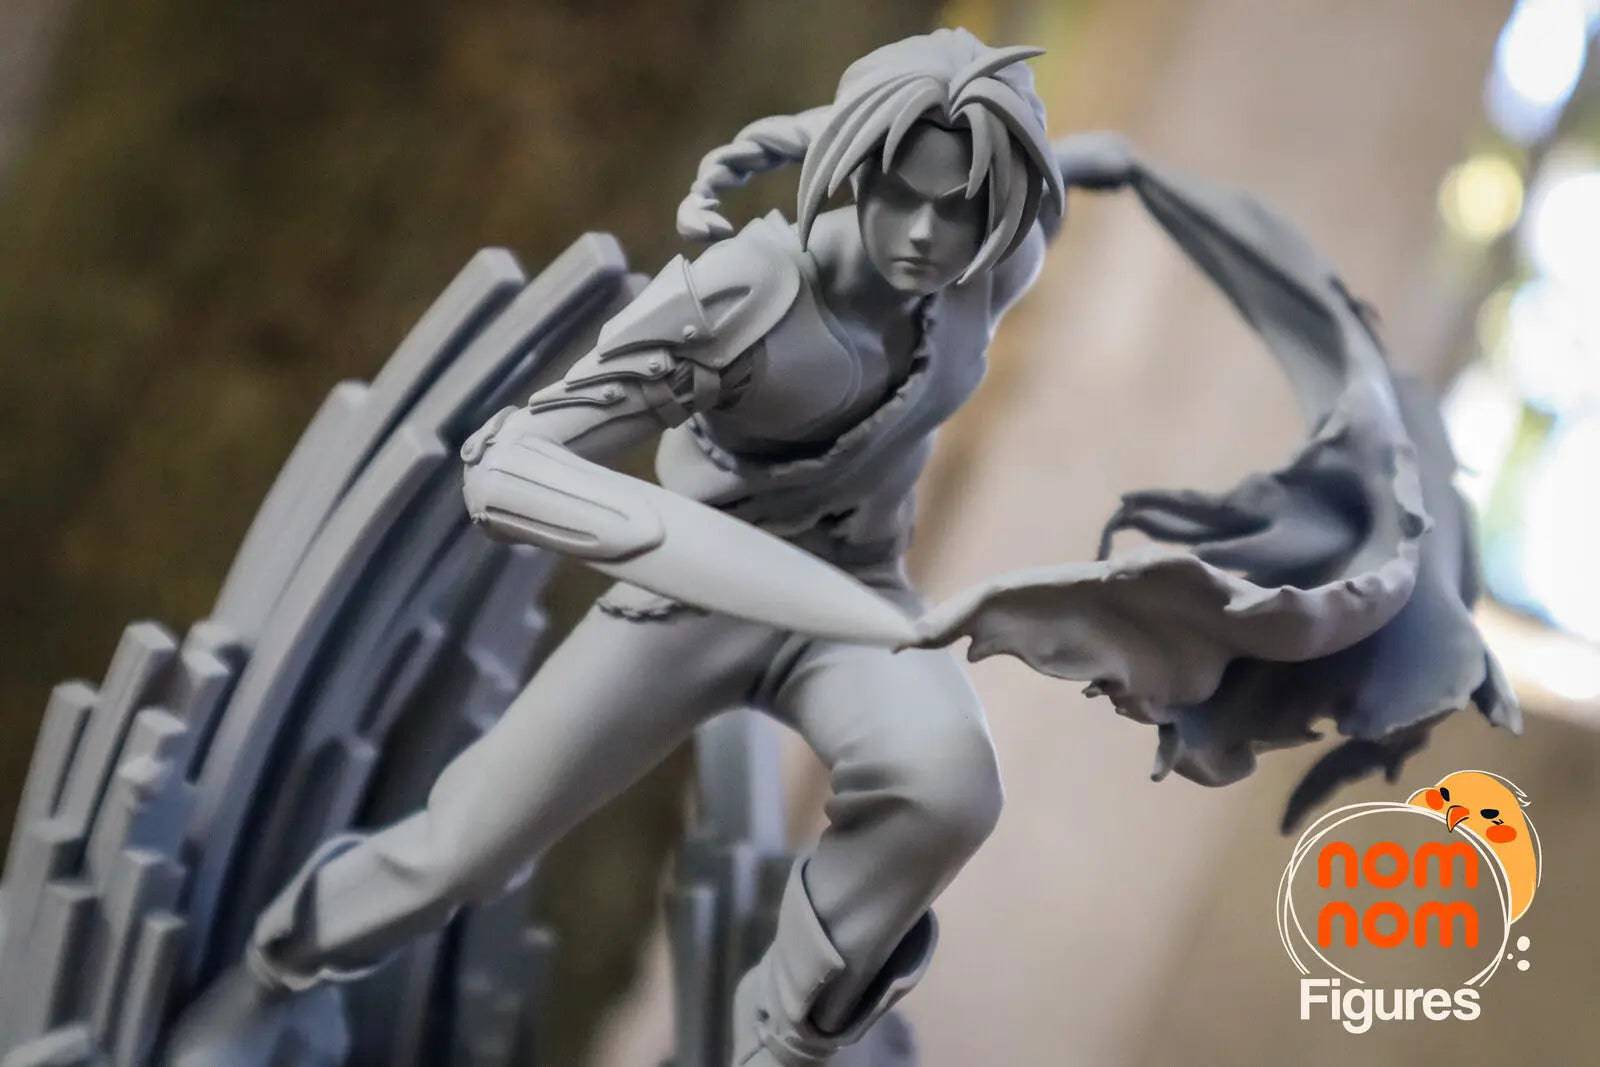 Young Alchemical Prodigy | Resin Garage Kit Sculpture Anime Video Game Fan Art Statue | Nomnom Figures - Tattles Told 3D